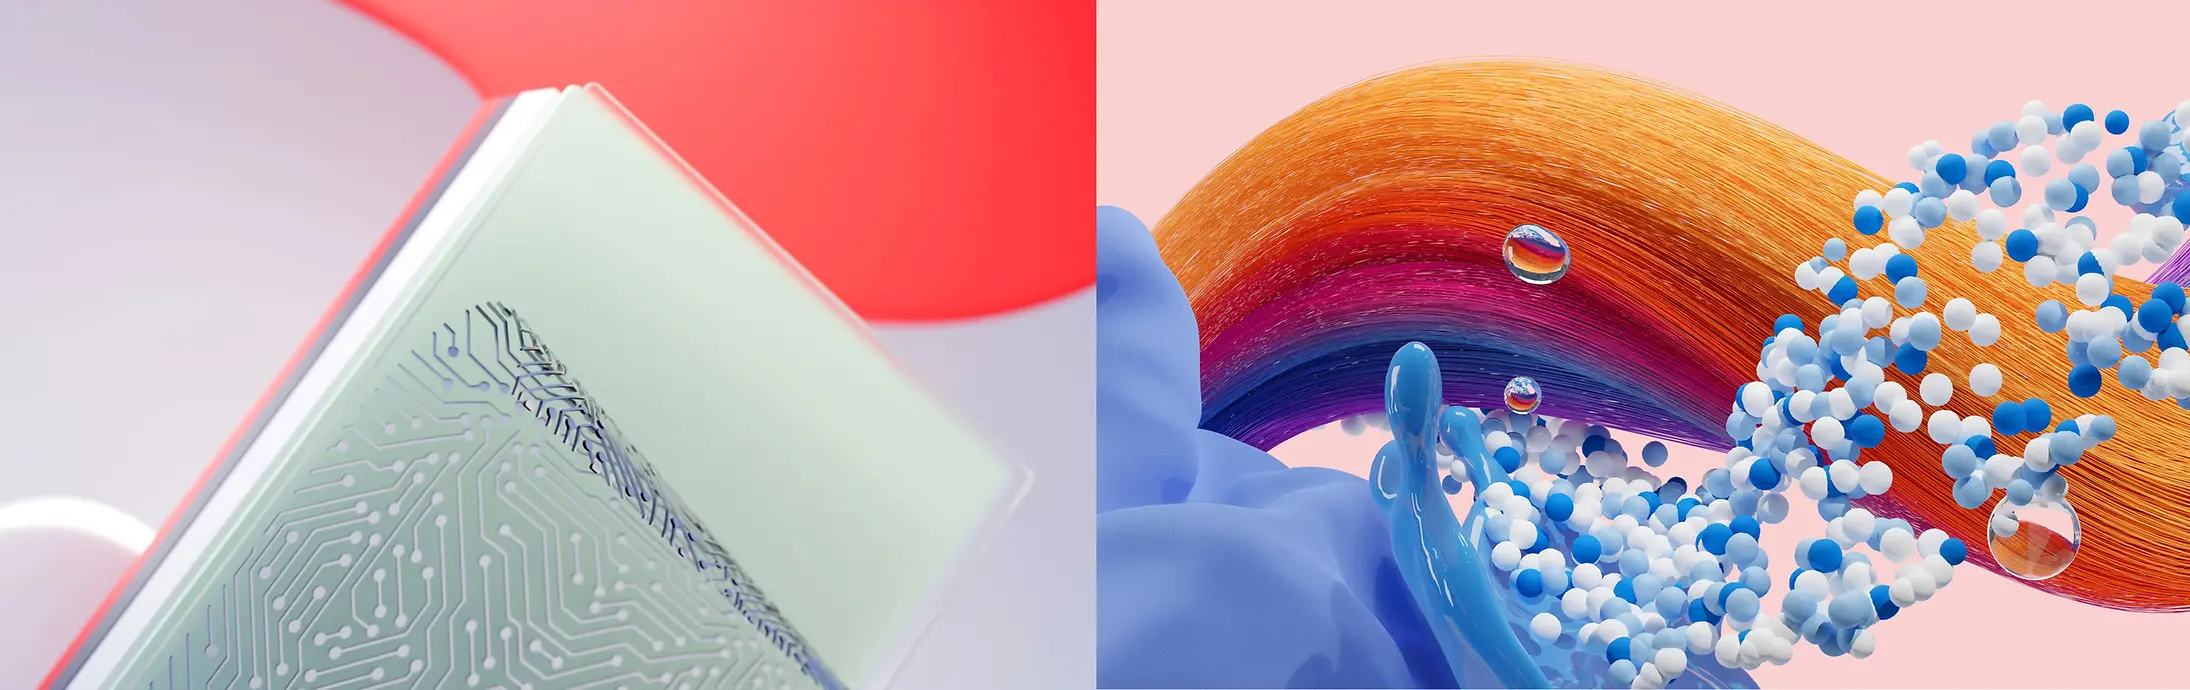 Abstract image representing the Henkel businesses Adhesive Technologies, Hair and Laundry & Home Care.